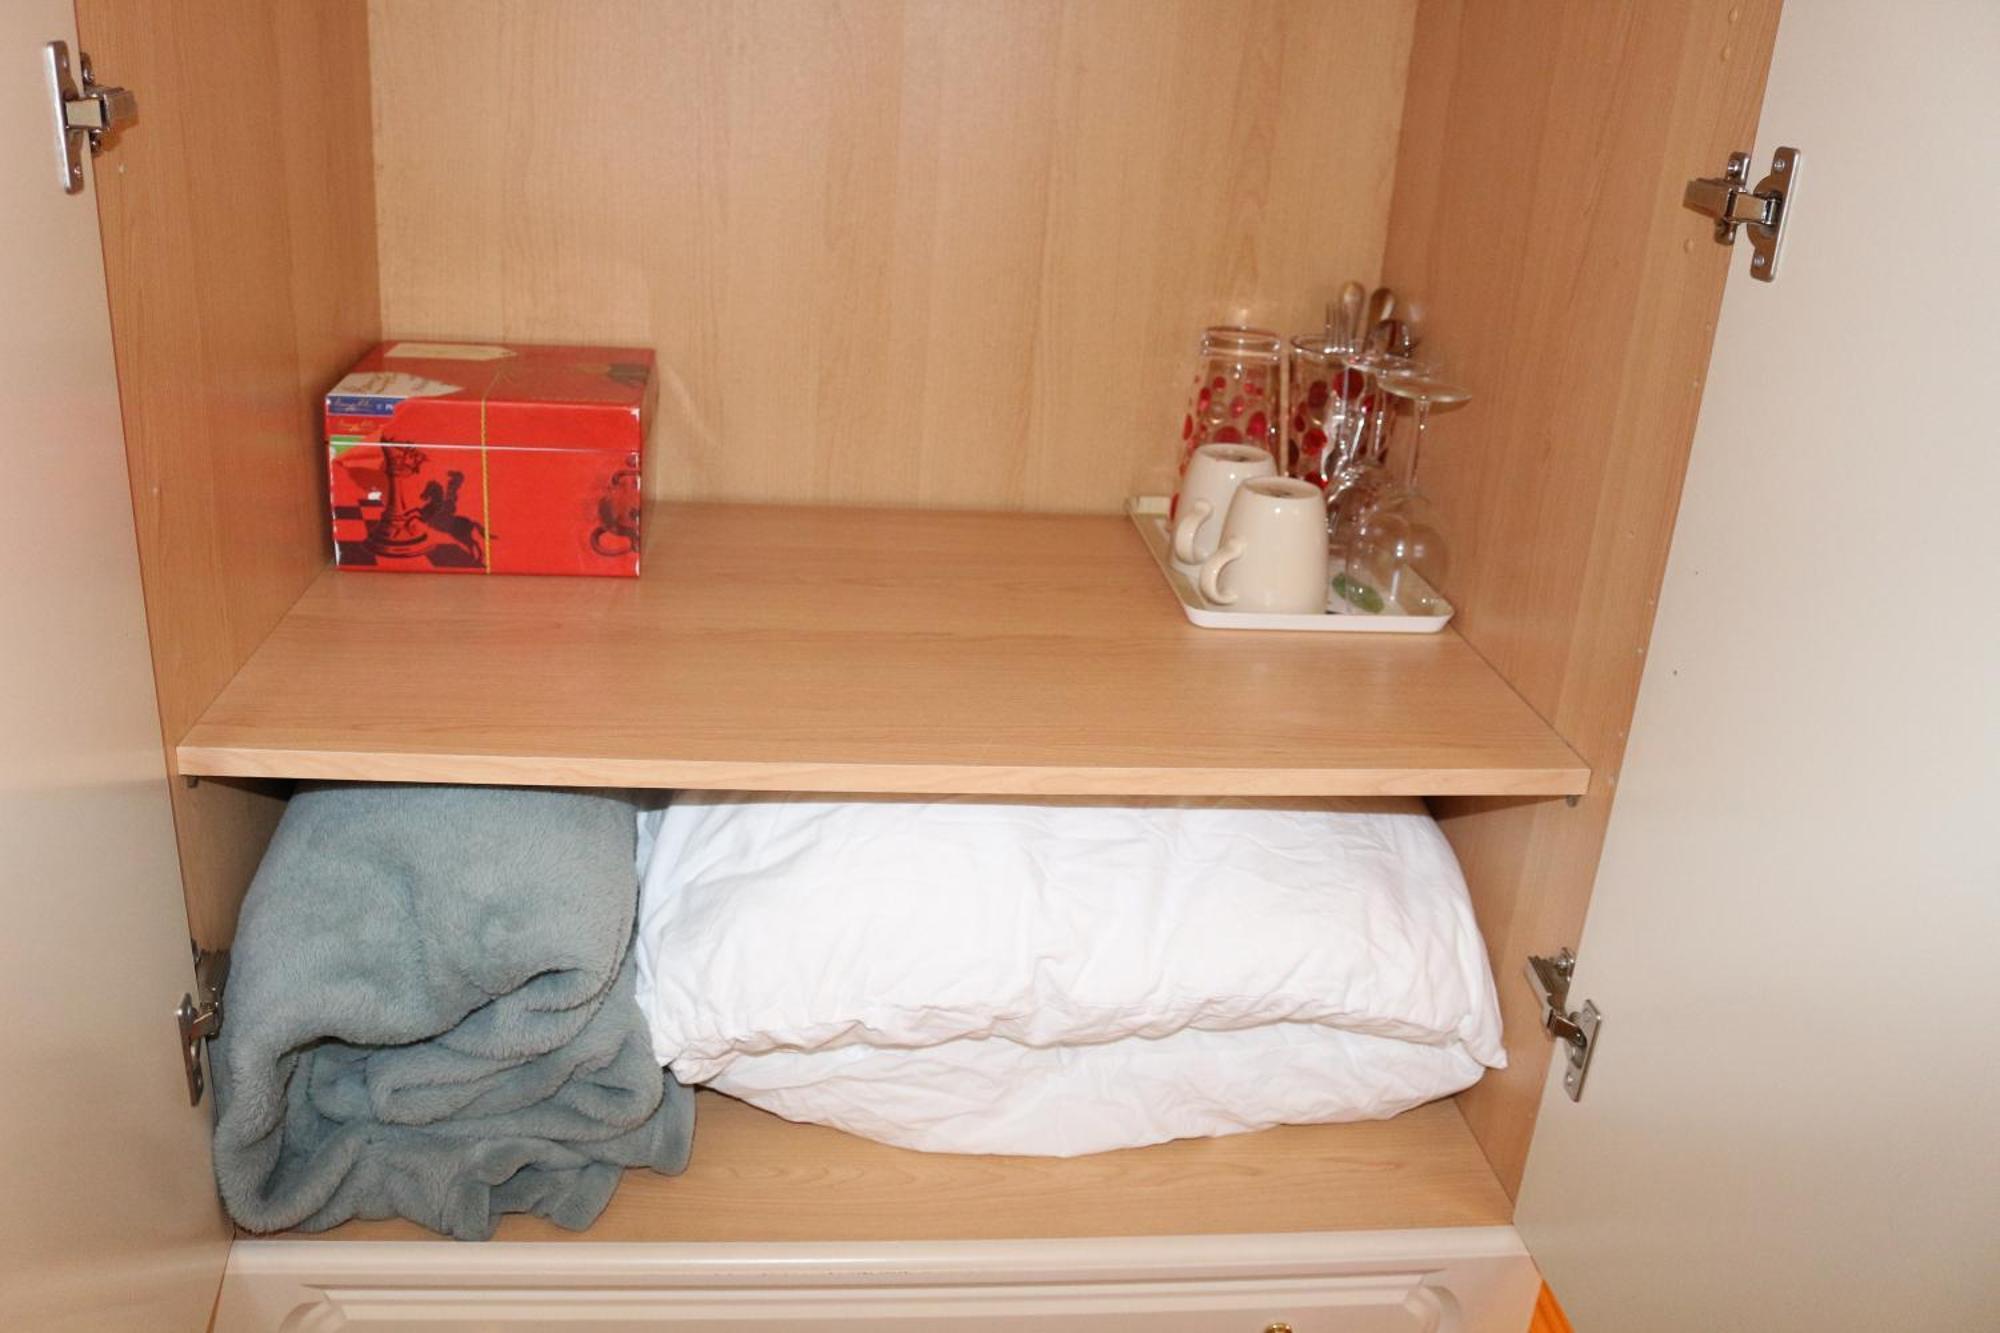 Ensuite Master Bedroom, Private Bathroom, Inside Family Home, Walking Distance To Harry Potter Studios 沃特福德 外观 照片